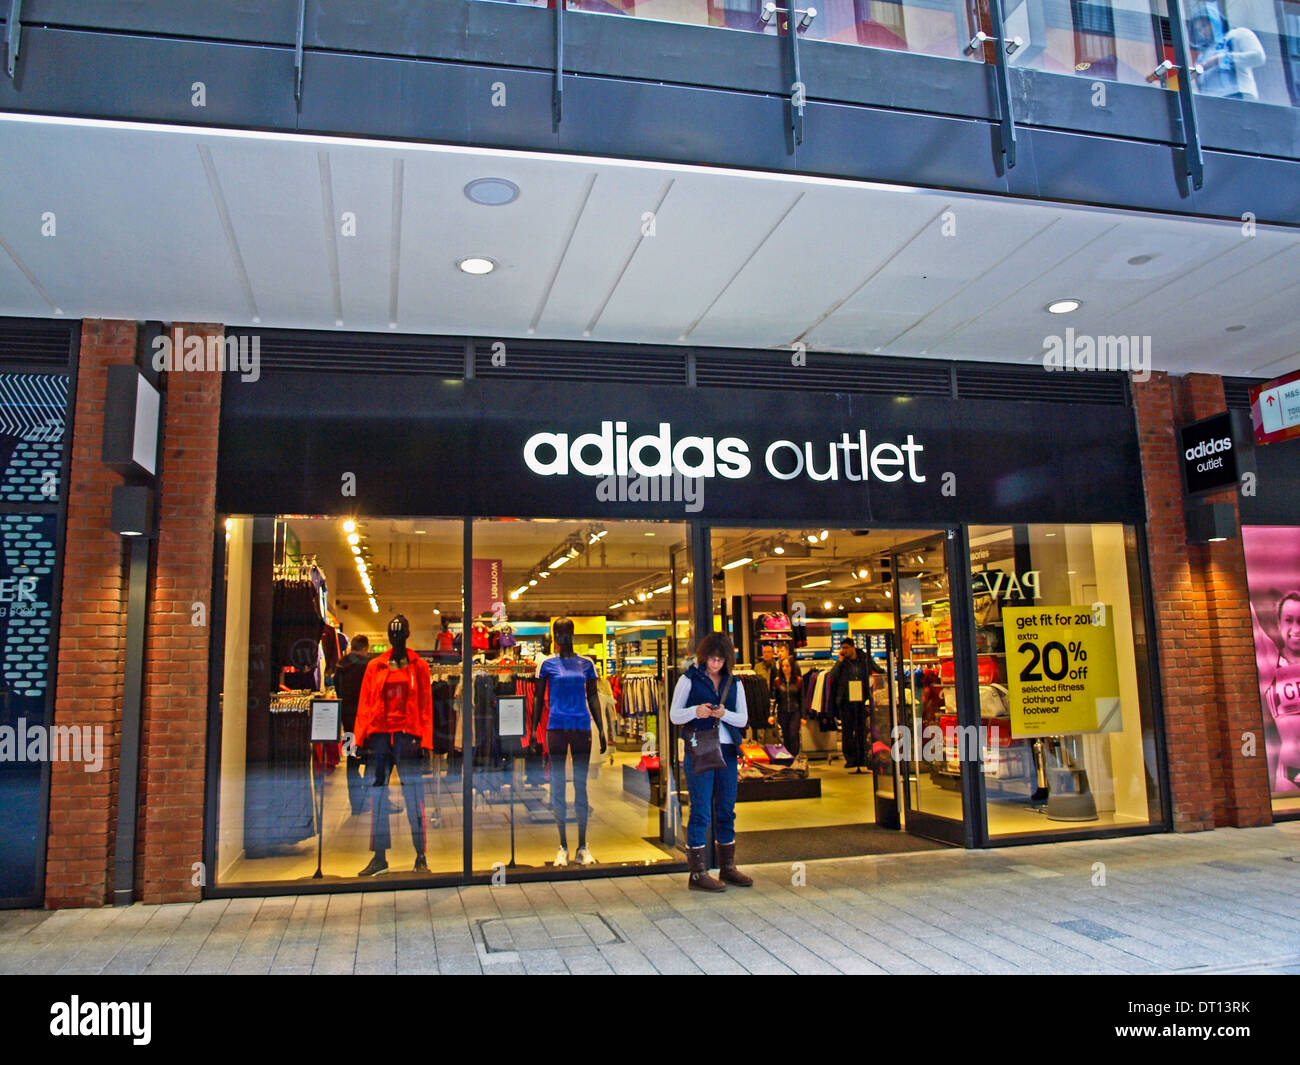 adidas outlet wembley opening times